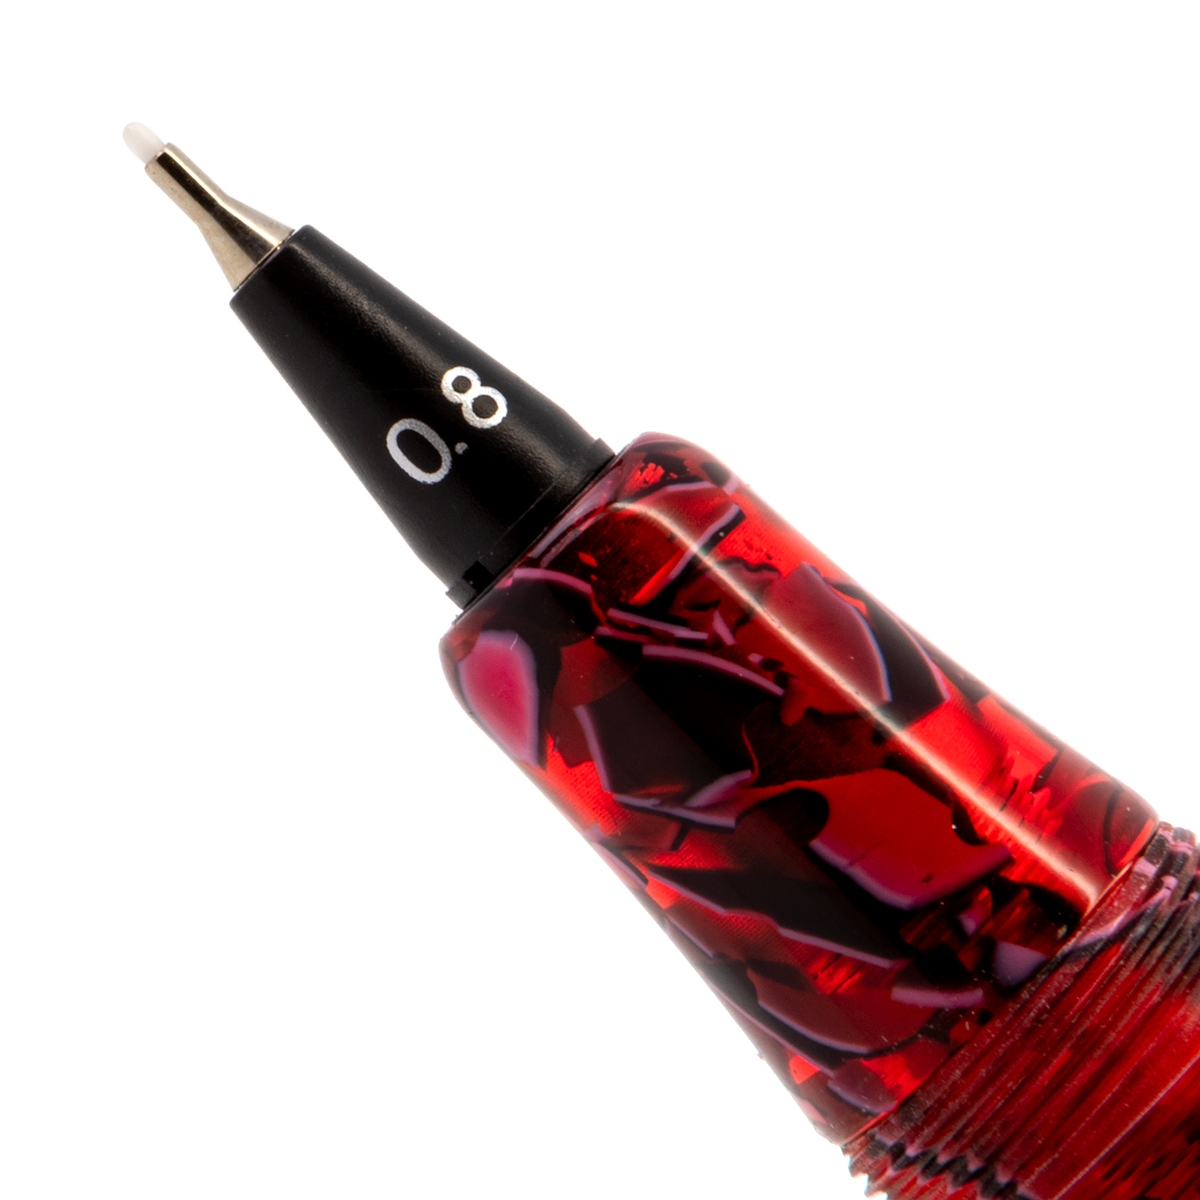 Yookers Front Section for Gaia Fiber Pen Red/Black Marble Resin